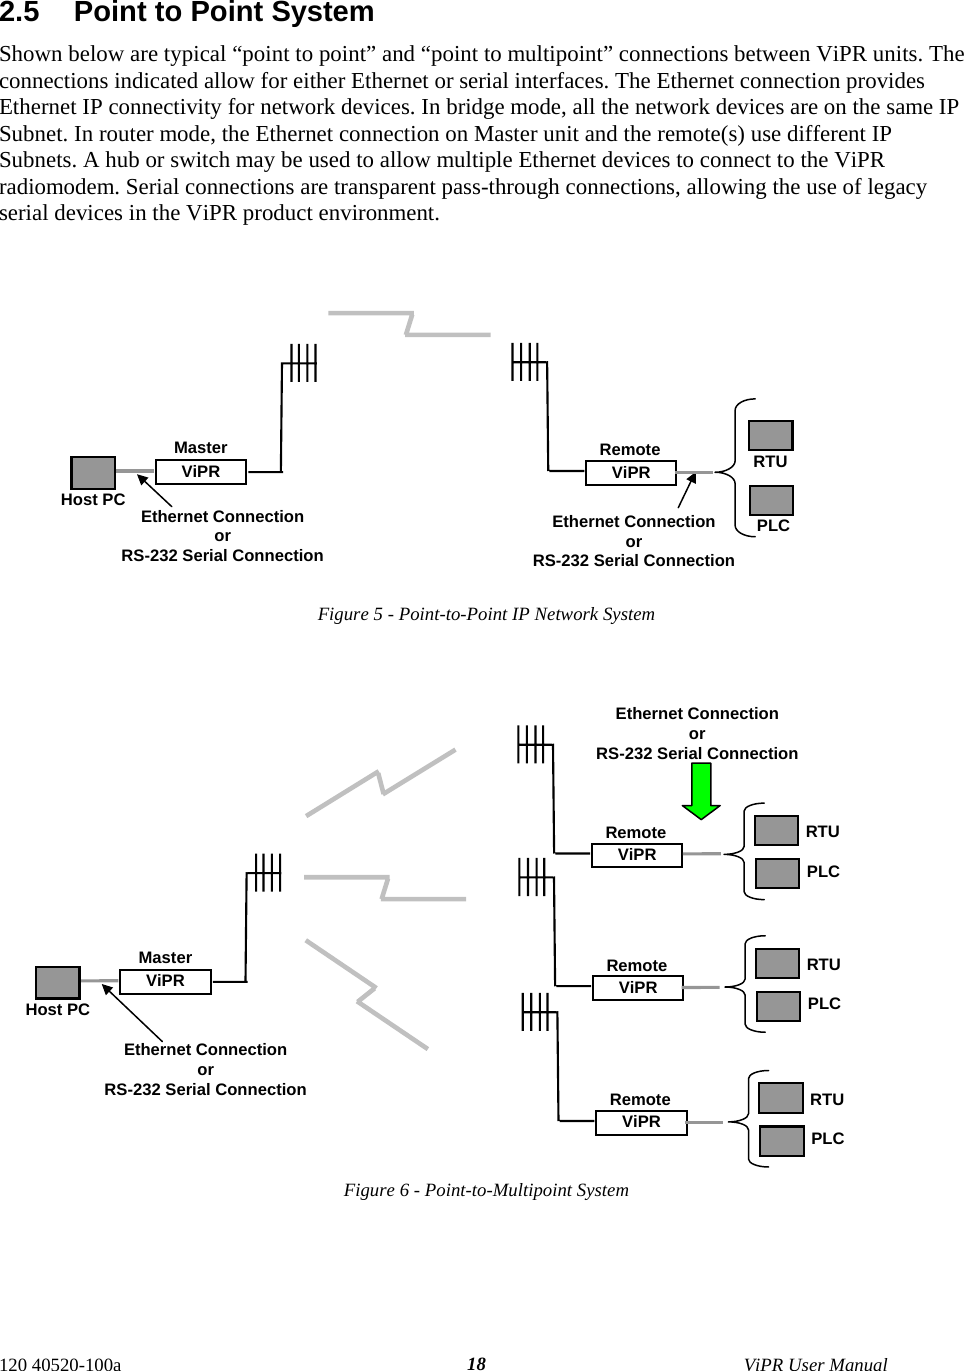  2.5  Point to Point System Shown below are typical “point to point” and “point to multipoint” connections between ViPR units. The connections indicated allow for either Ethernet or serial interfaces. The Ethernet connection provides Ethernet IP connectivity for network devices. In bridge mode, all the network devices are on the same IP Subnet. In router mode, the Ethernet connection on Master unit and the remote(s) use different IP Subnets. A hub or switch may be used to allow multiple Ethernet devices to connect to the ViPR radiomodem. Serial connections are transparent pass-through connections, allowing the use of legacy serial devices in the ViPR product environment.     ViPR  RTU Remote PLC Ethernet Connection or RS-232 Serial Connection ViPR Master Host PC  Ethernet Connection  or  RS-232 Serial Connection  Figure 5 - Point-to-Point IP Network System  Figure 6 - Point-to-Multipoint System ViPR Master Host PC Ethernet Connection or RS-232 Serial Connection ViPR Remote  RTU PLC Ethernet Connection or RS-232 Serial Connection ViPR RTU PLC Remote ViPR RTU PLC Remote 120 40520-100a    ViPR User Manual  18